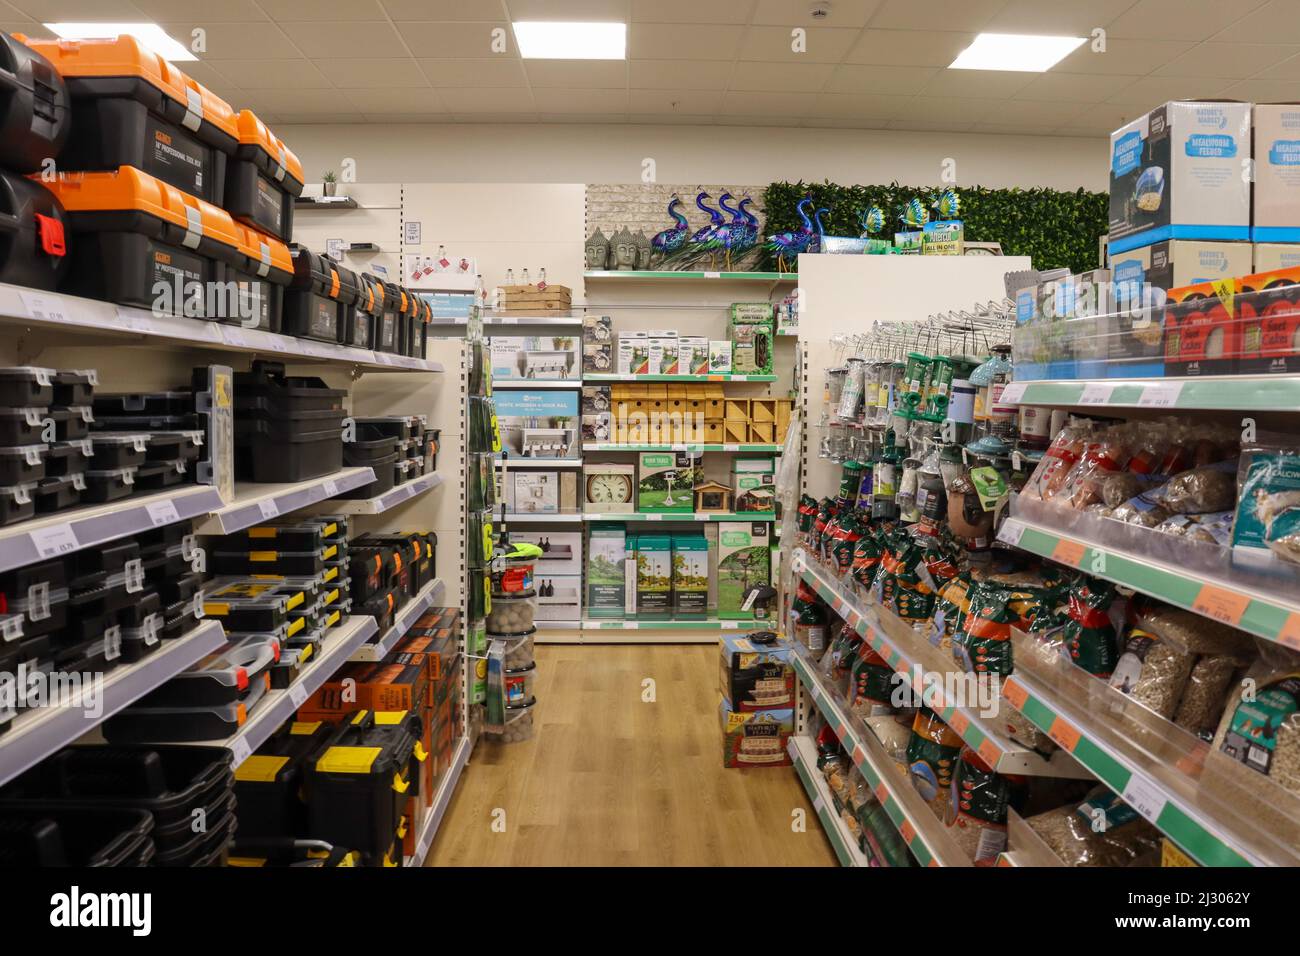 Tool boxes, bird feeders and garden accessories, on shelves in a large retailer Stock Photo